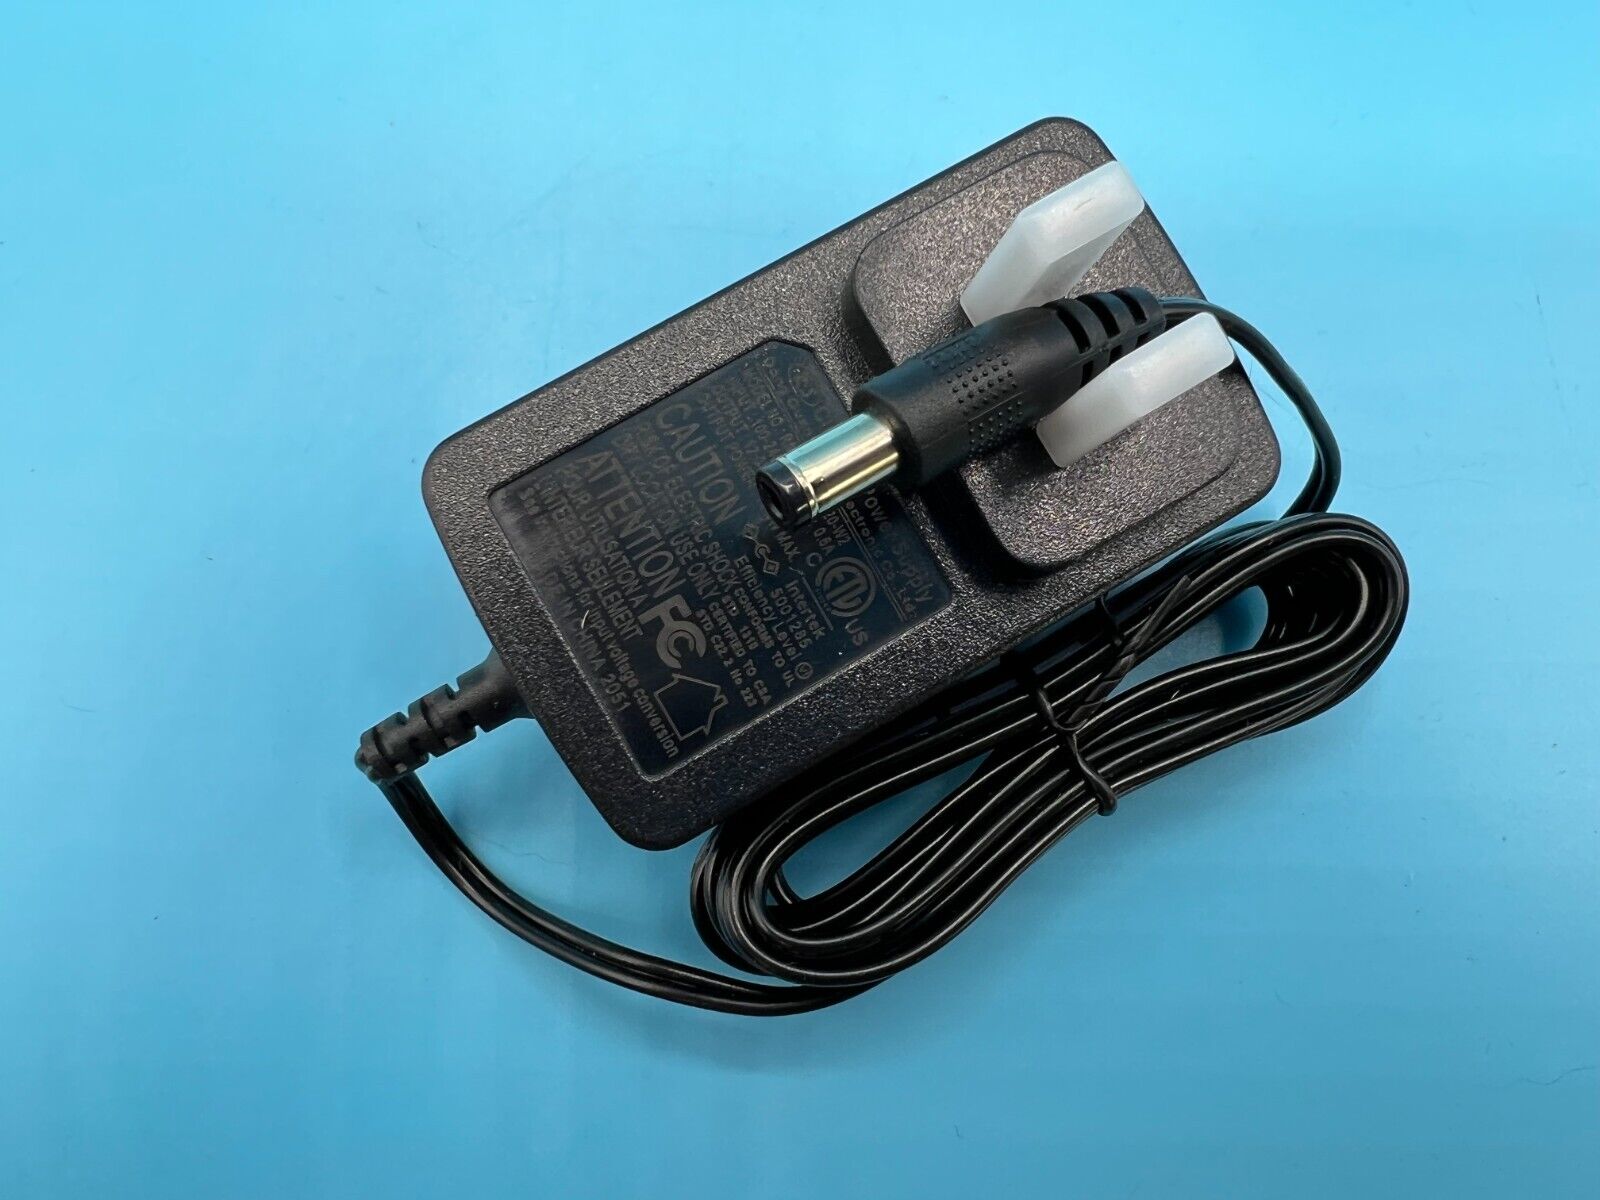 RS Class 2 Power Supply Adapter RSS1002-144120-W2 12V 1.2A Connection Split/Duplication: 1:2 Type: Adapter Feature